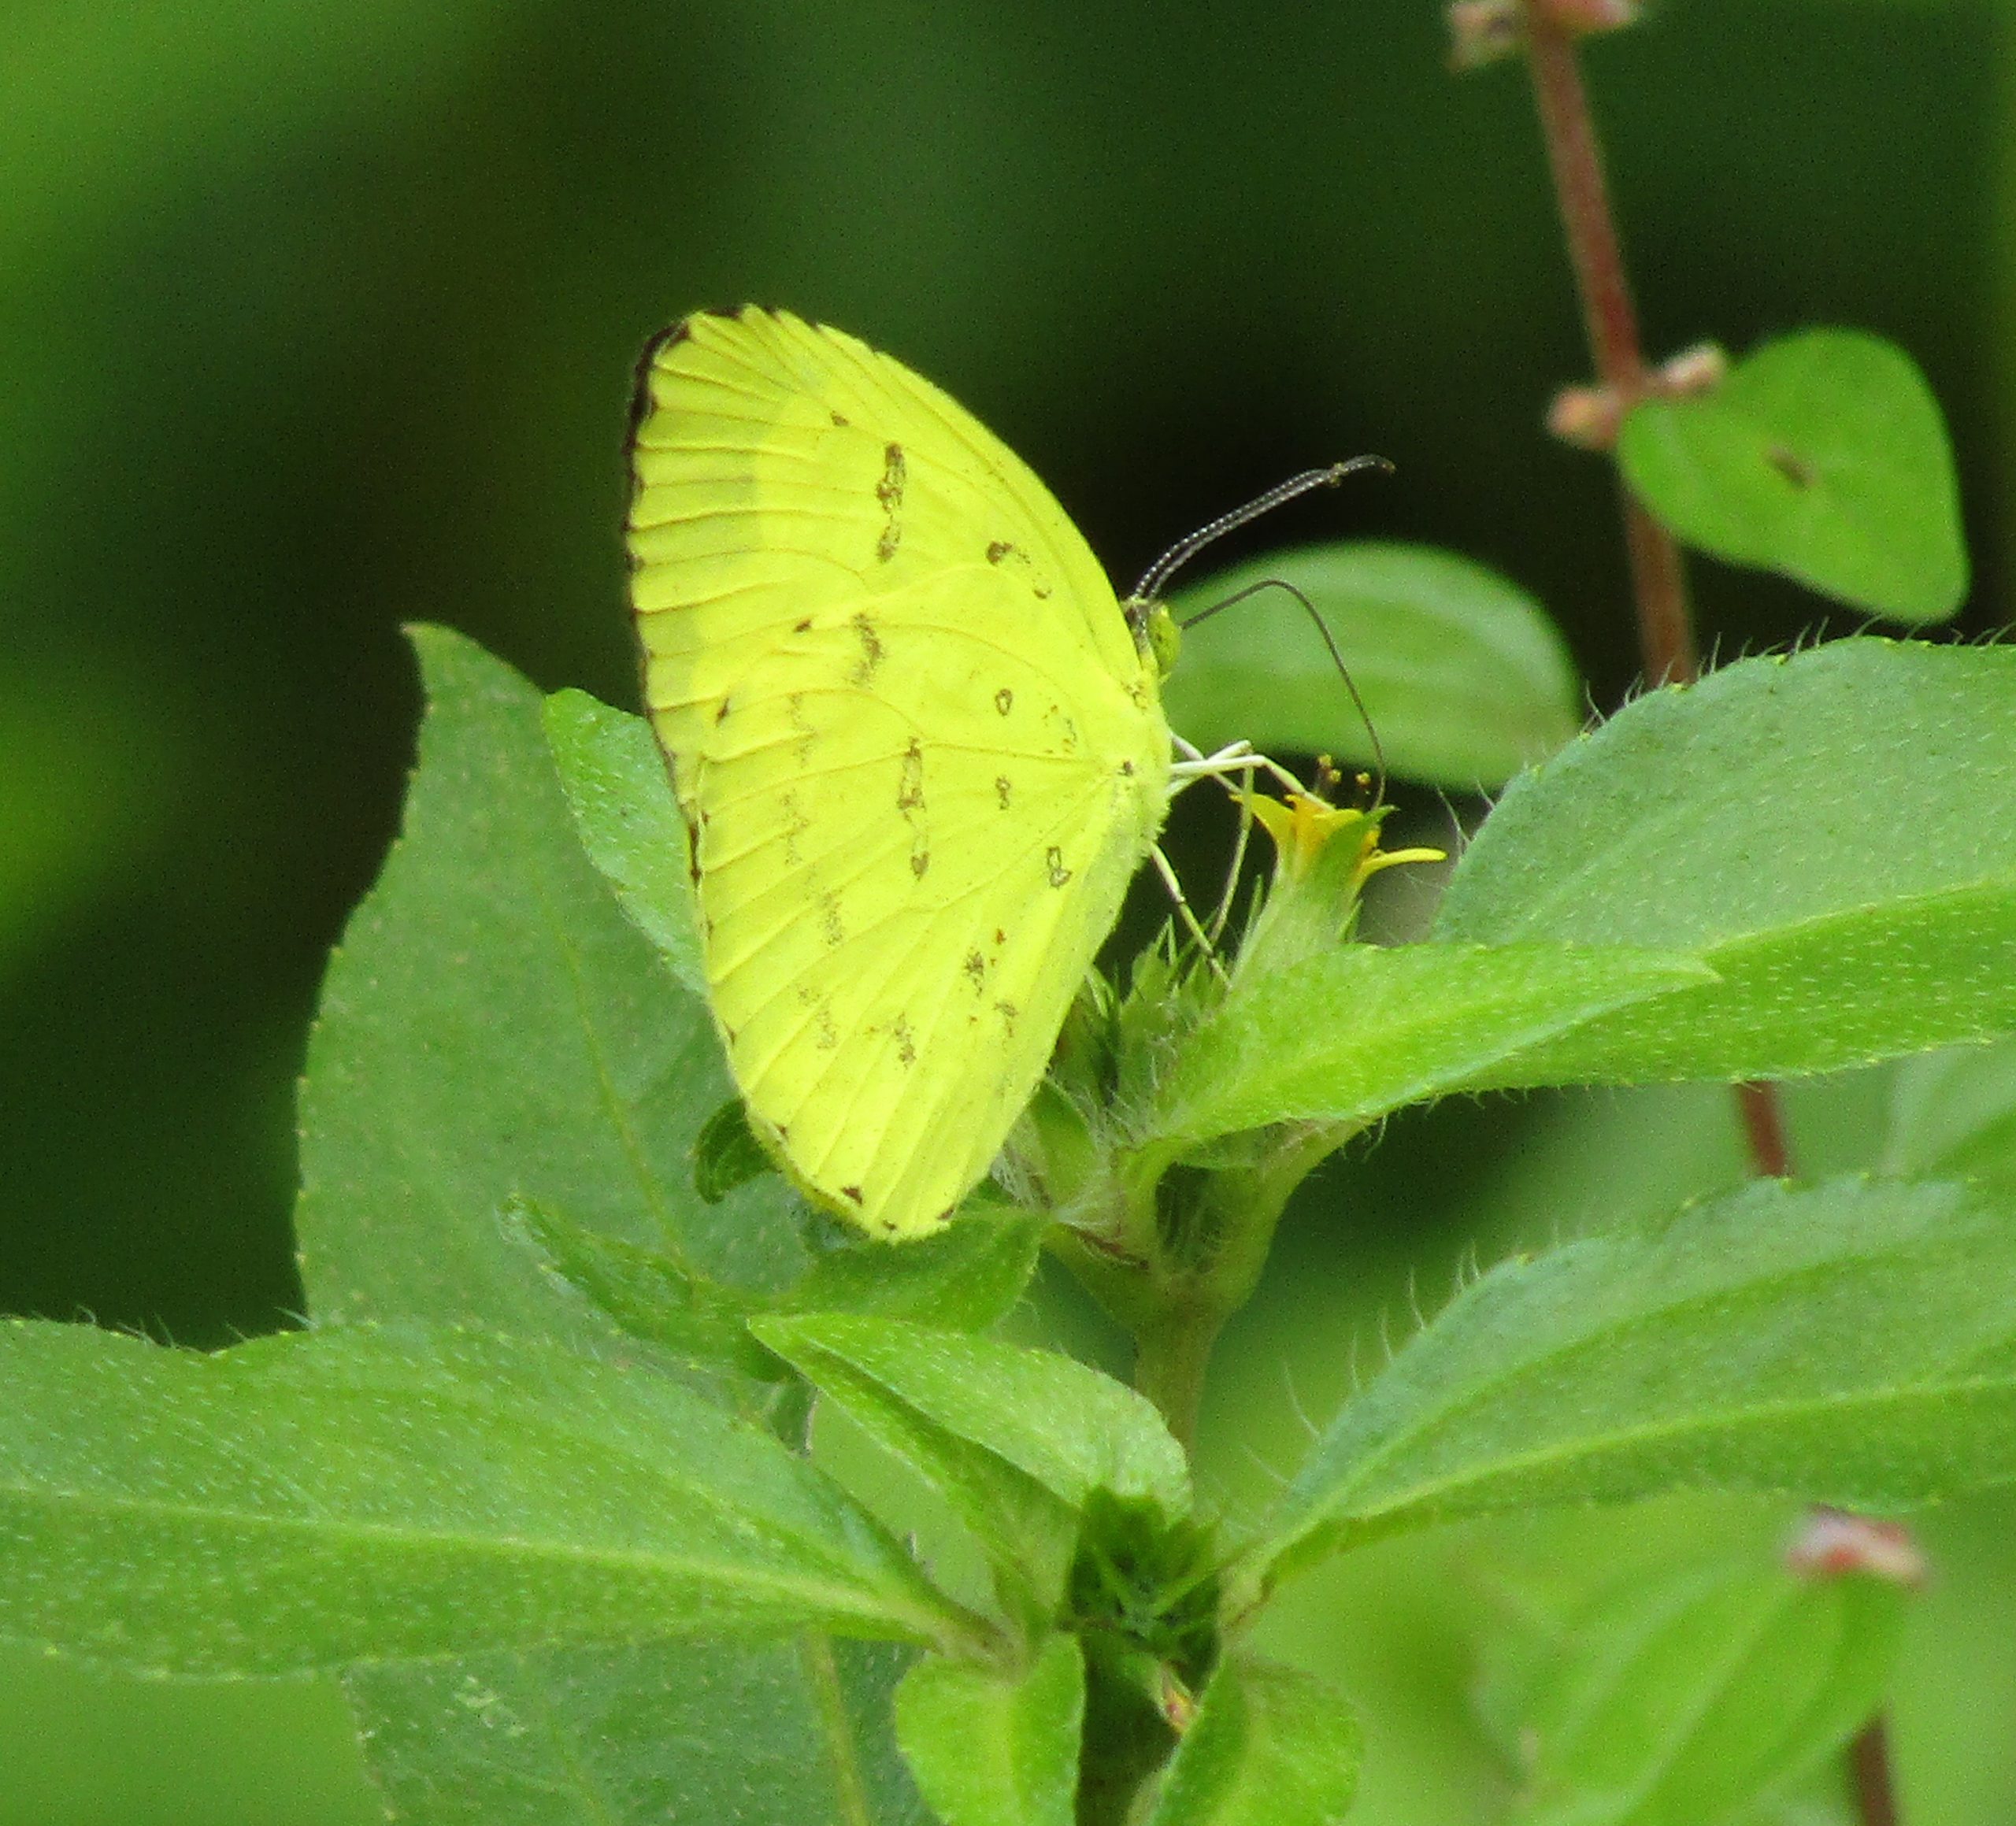 A yellow butterfly on a leaf.